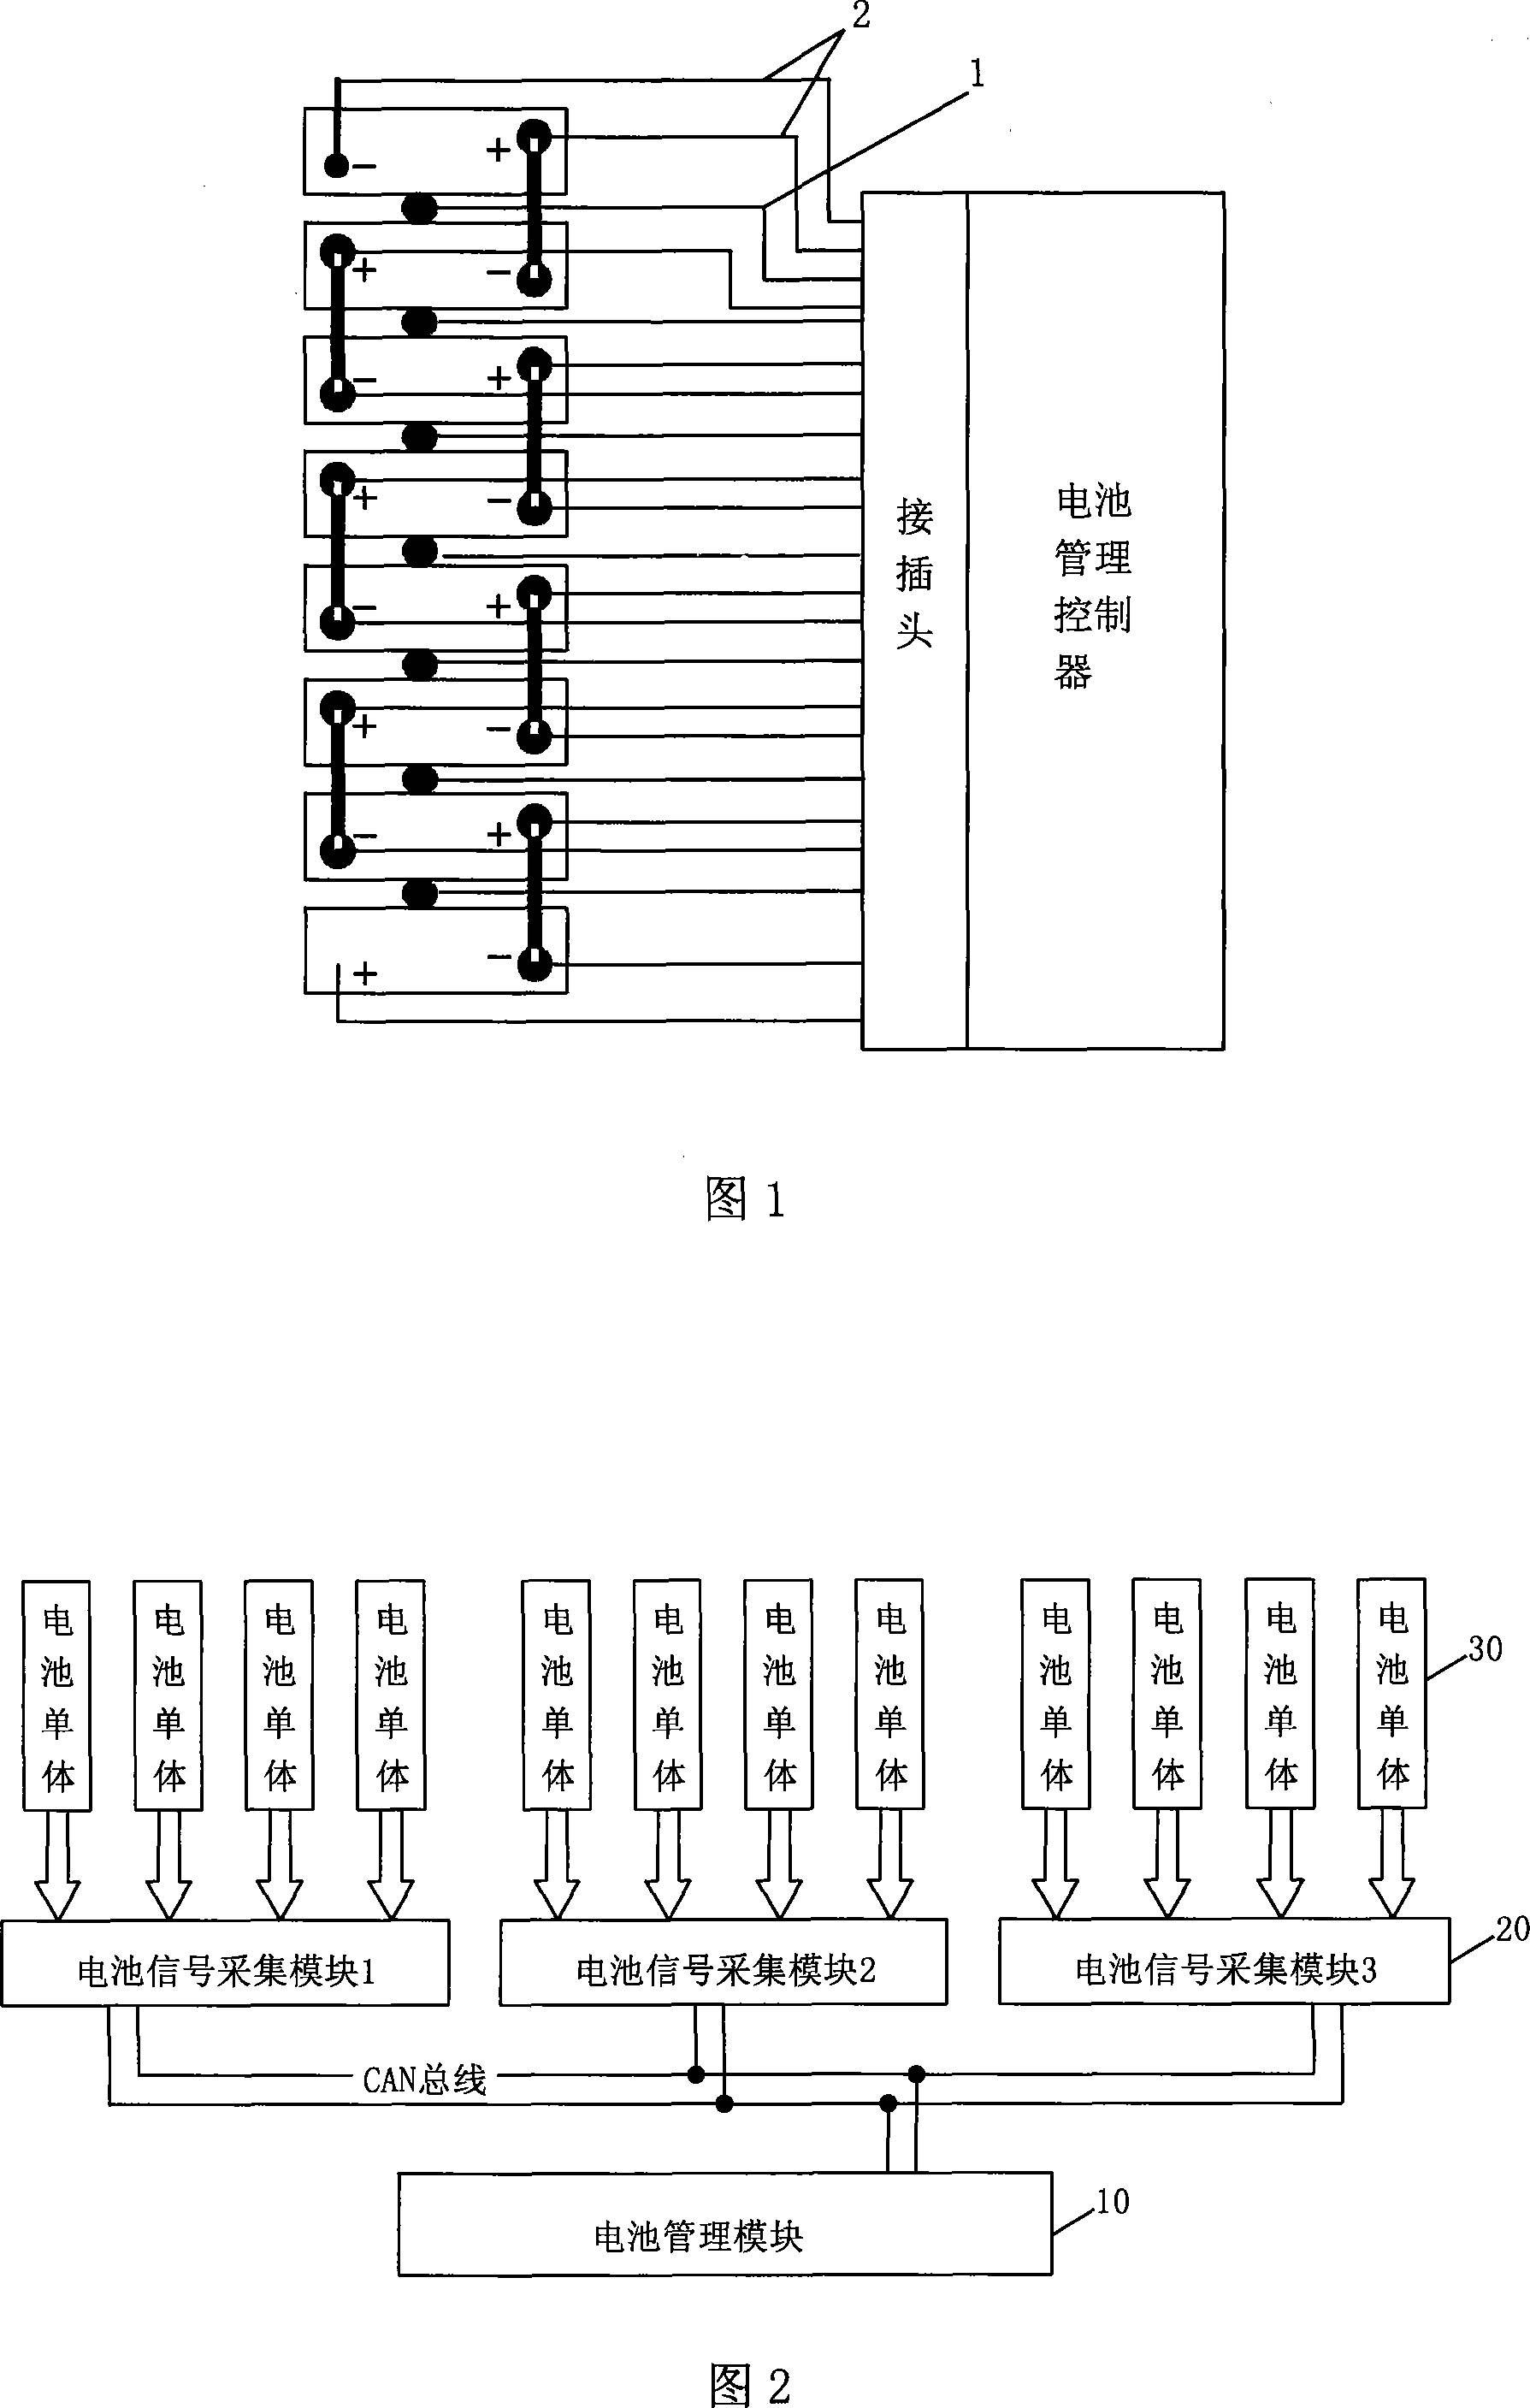 Multiple step type battery control system in use for hybrid powered car